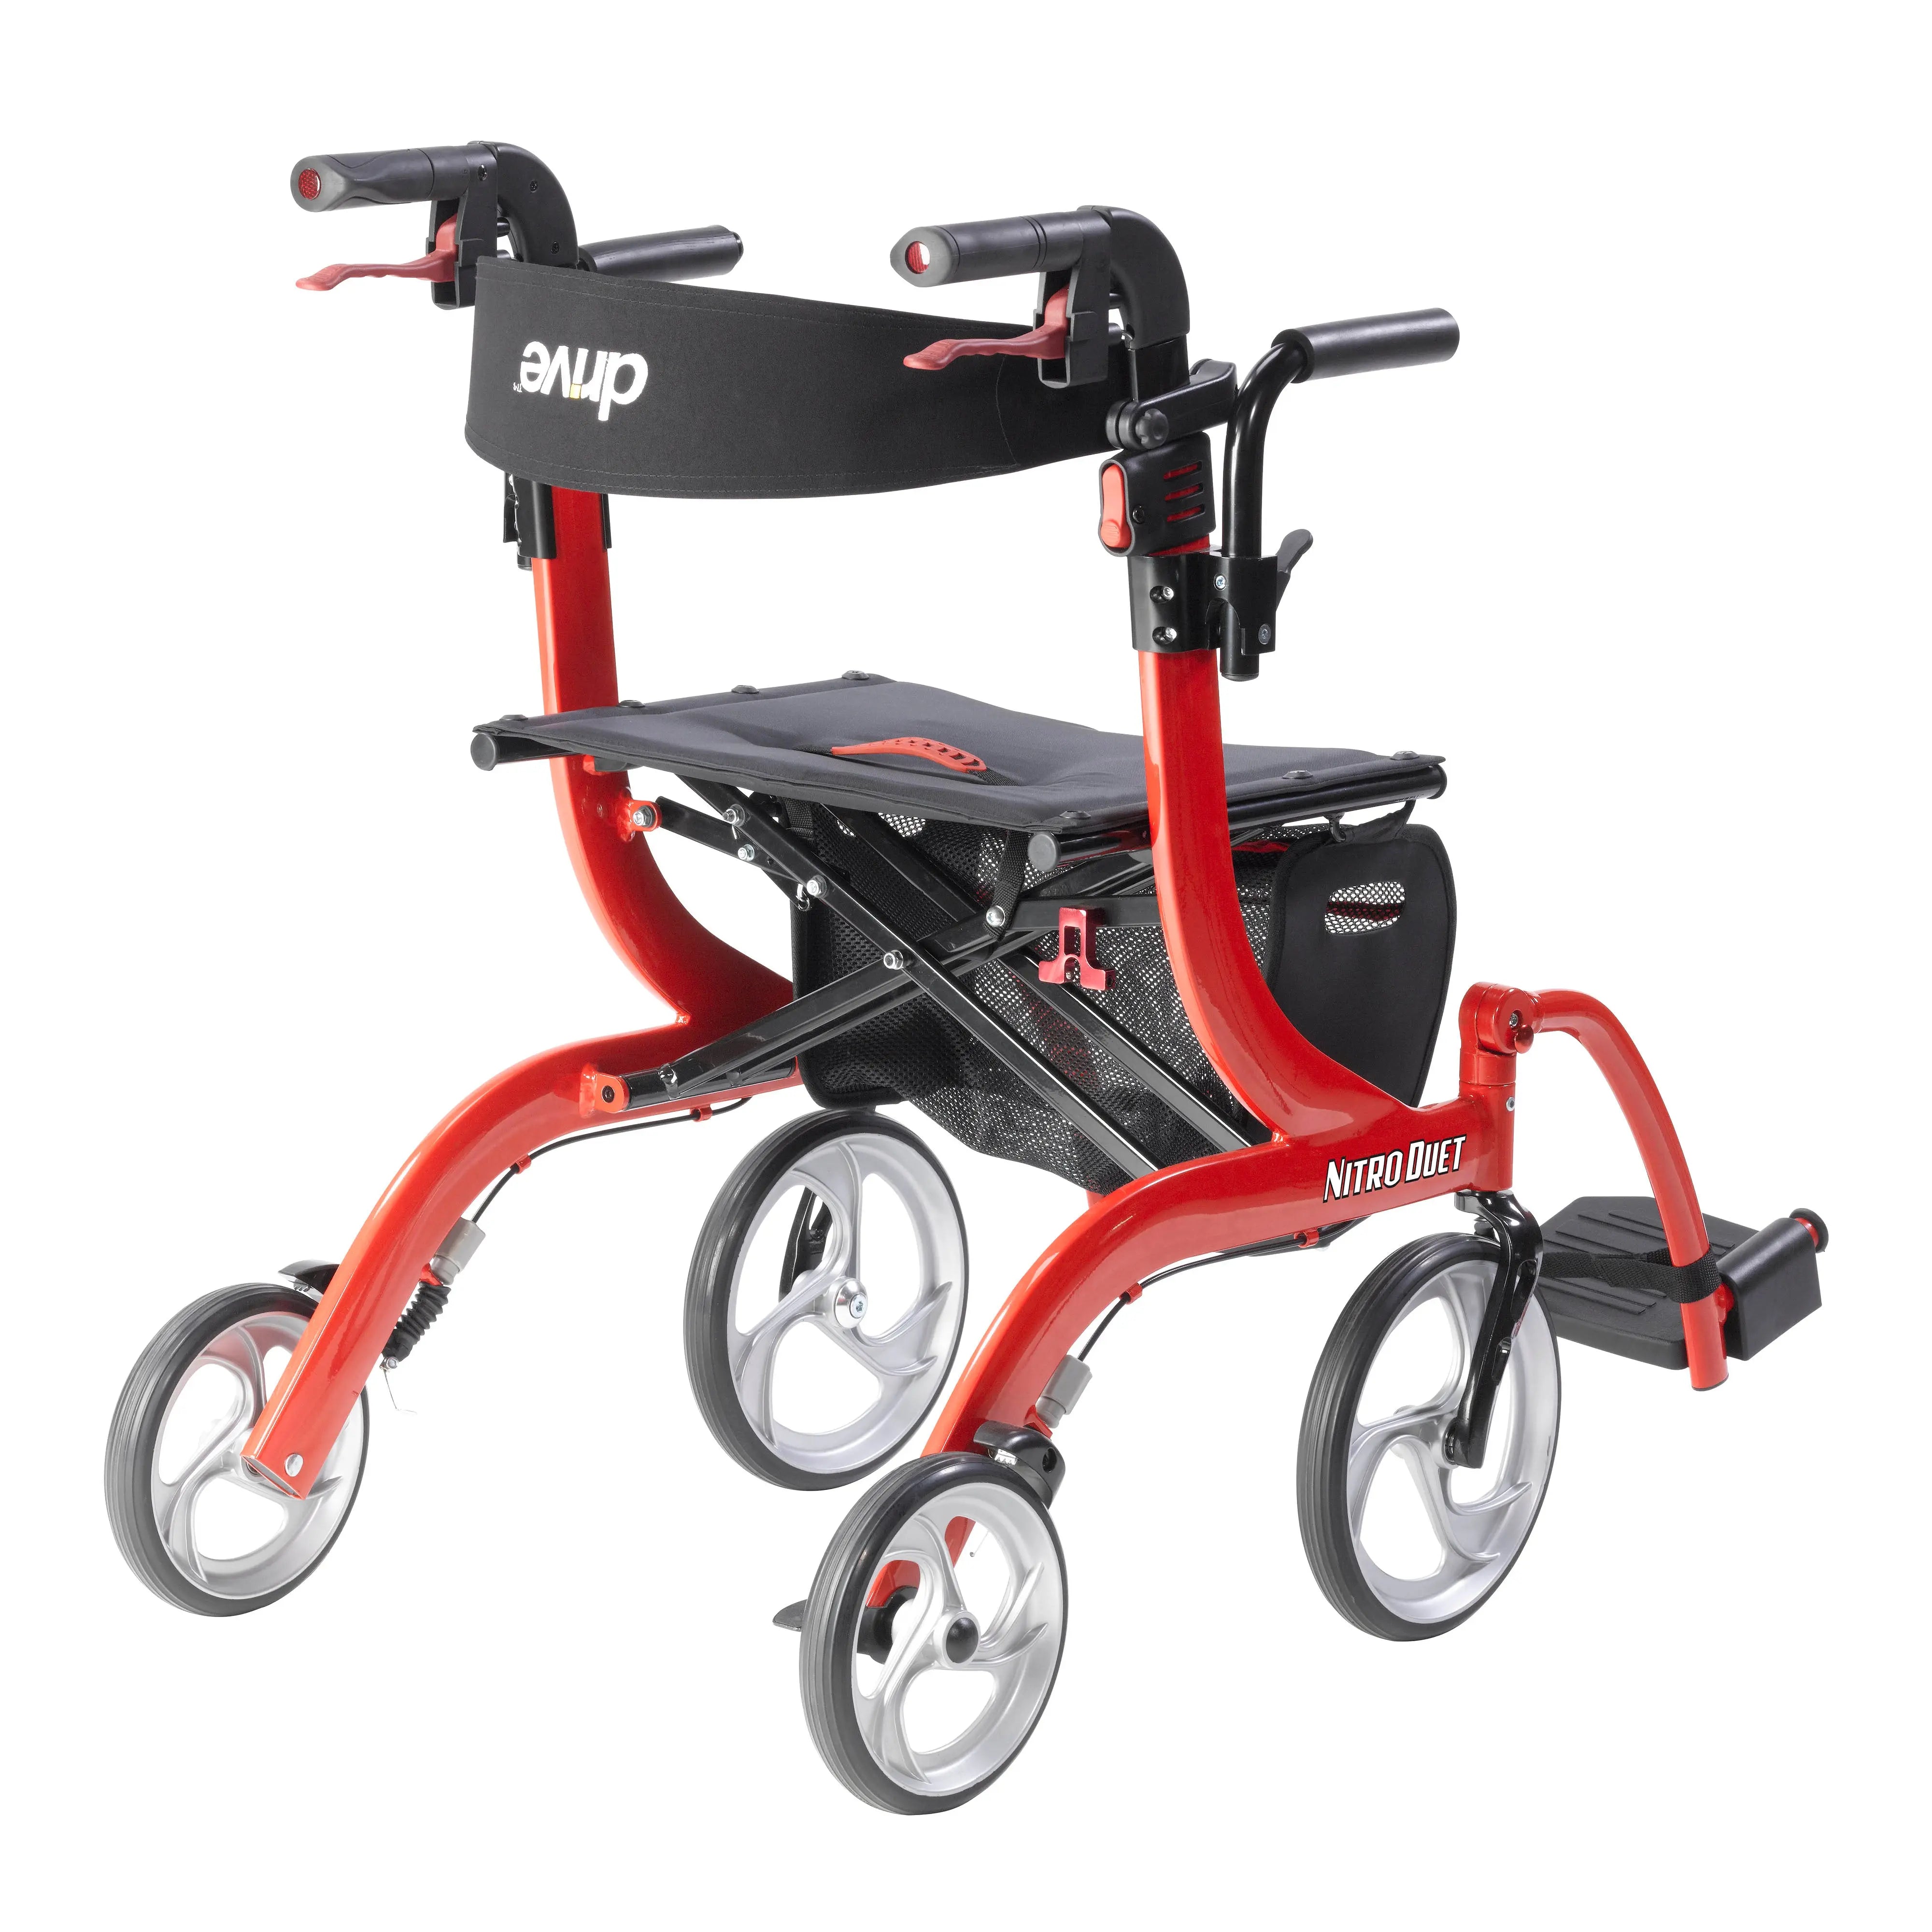 Nitro Duet Dual Function Transport Wheelchair and Rollator Rolling Walker, Red